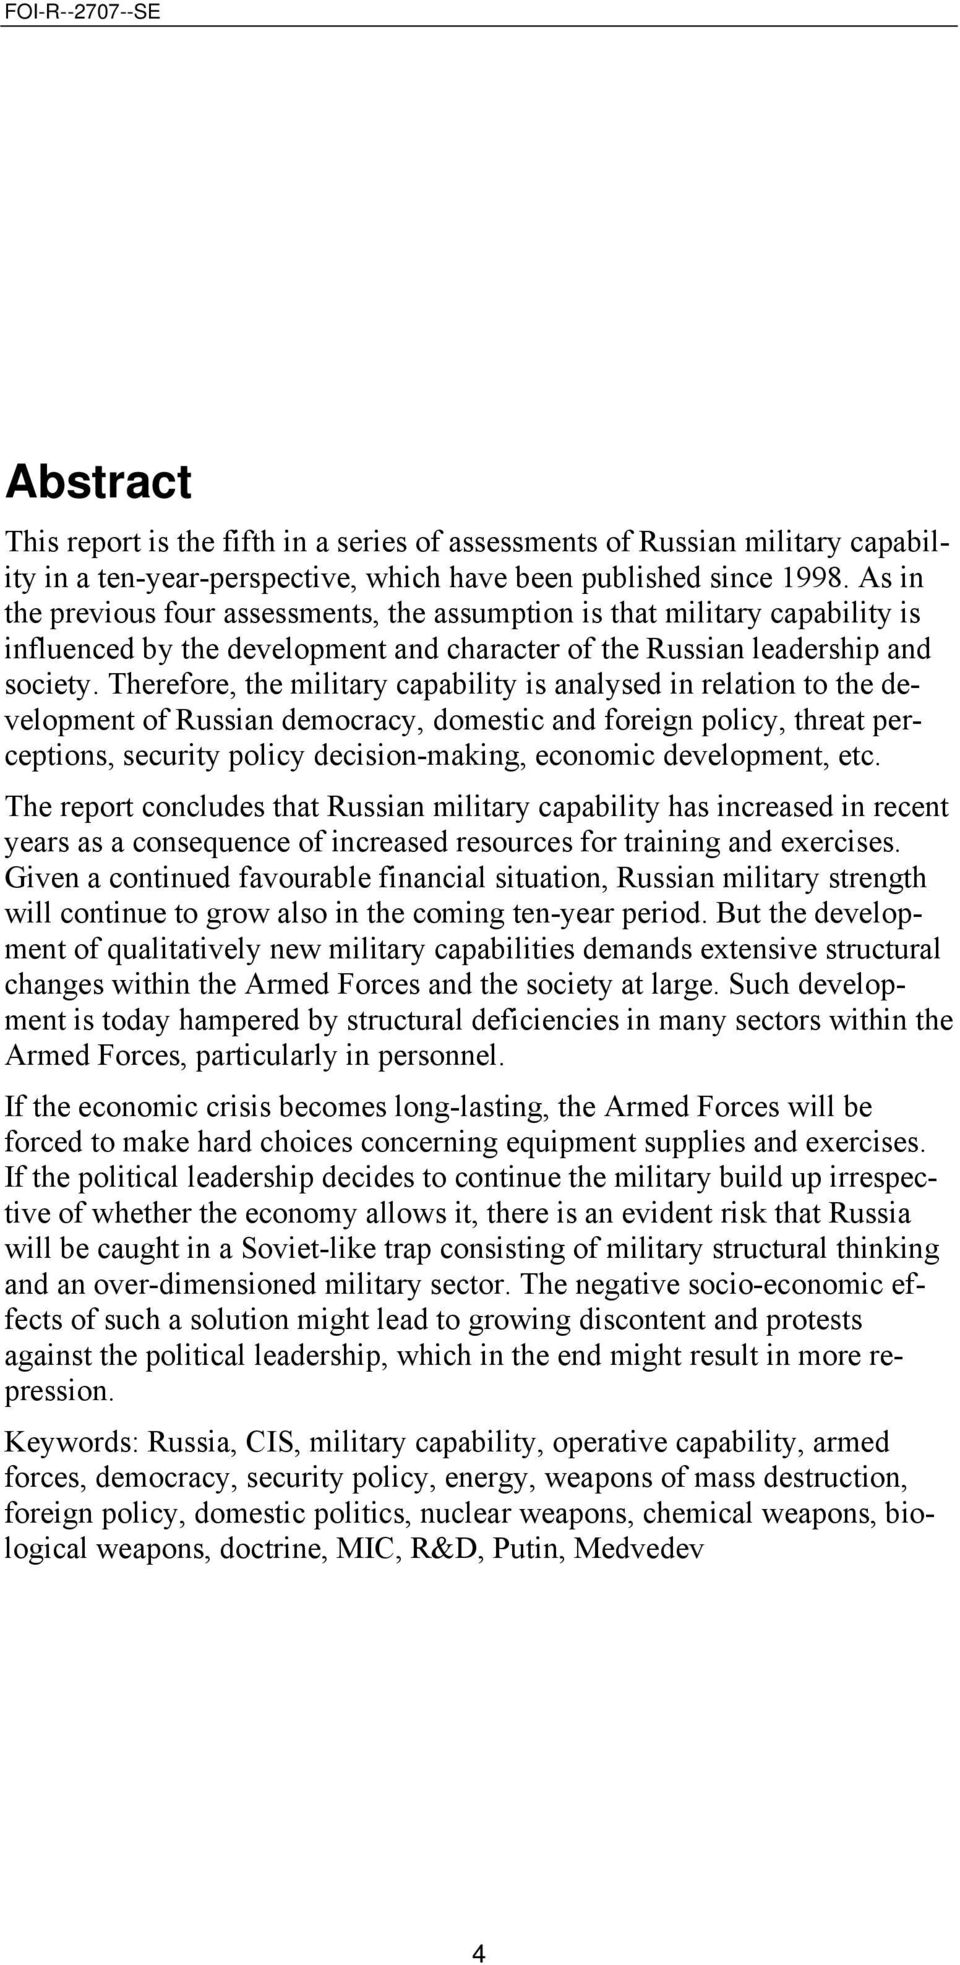 Therefore, the military capability is analysed in relation to the development of Russian democracy, domestic and foreign policy, threat perceptions, security policy decision-making, economic